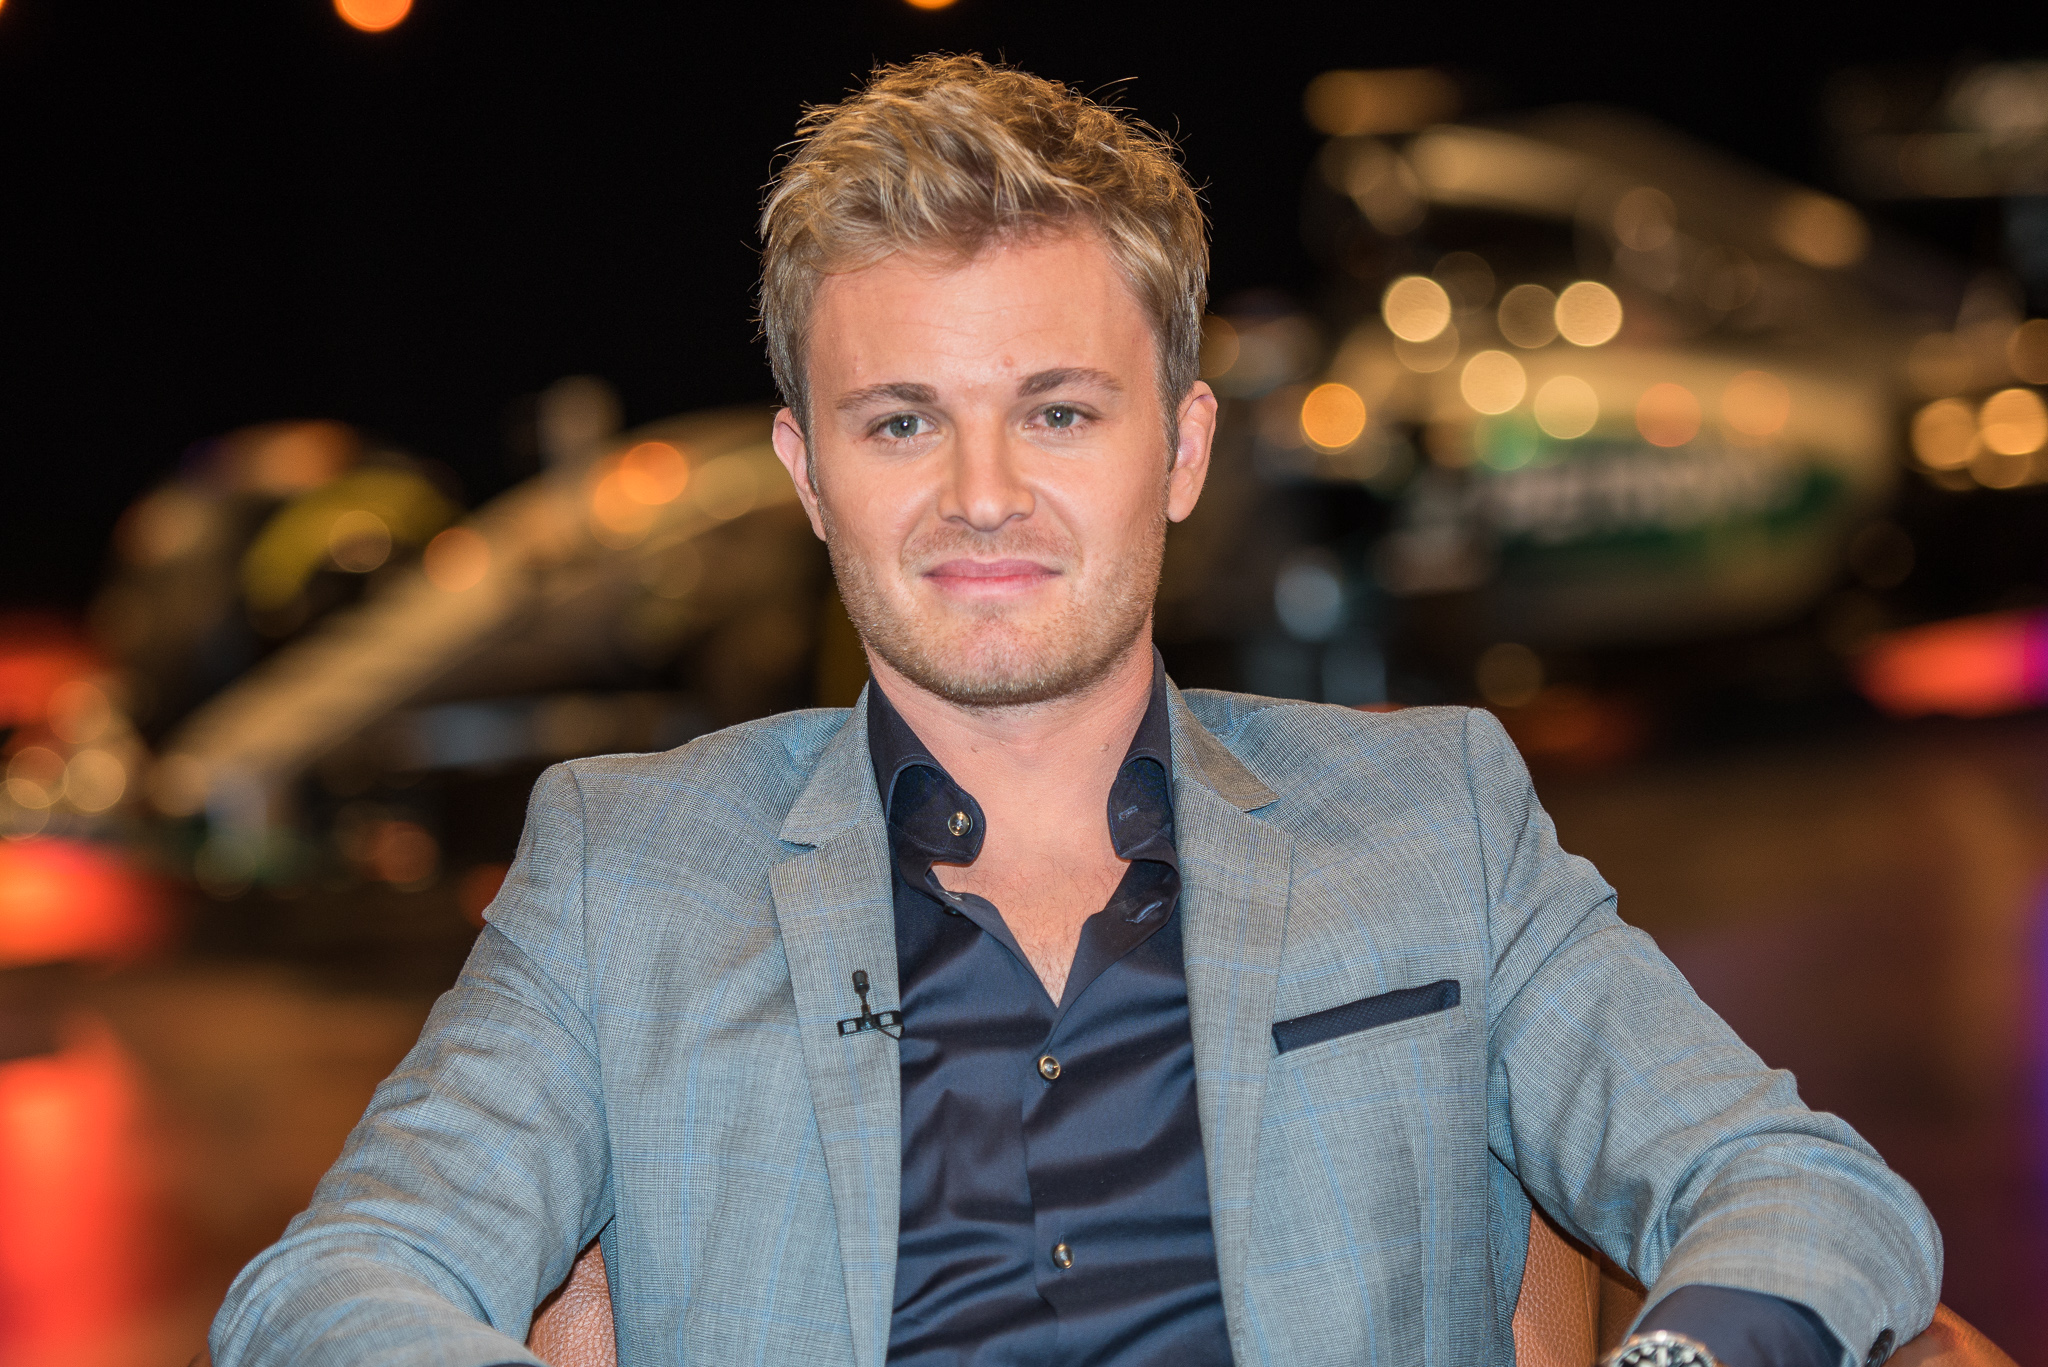 World champion Nico Rosberg excited about Ferrari fielding two champions in same race